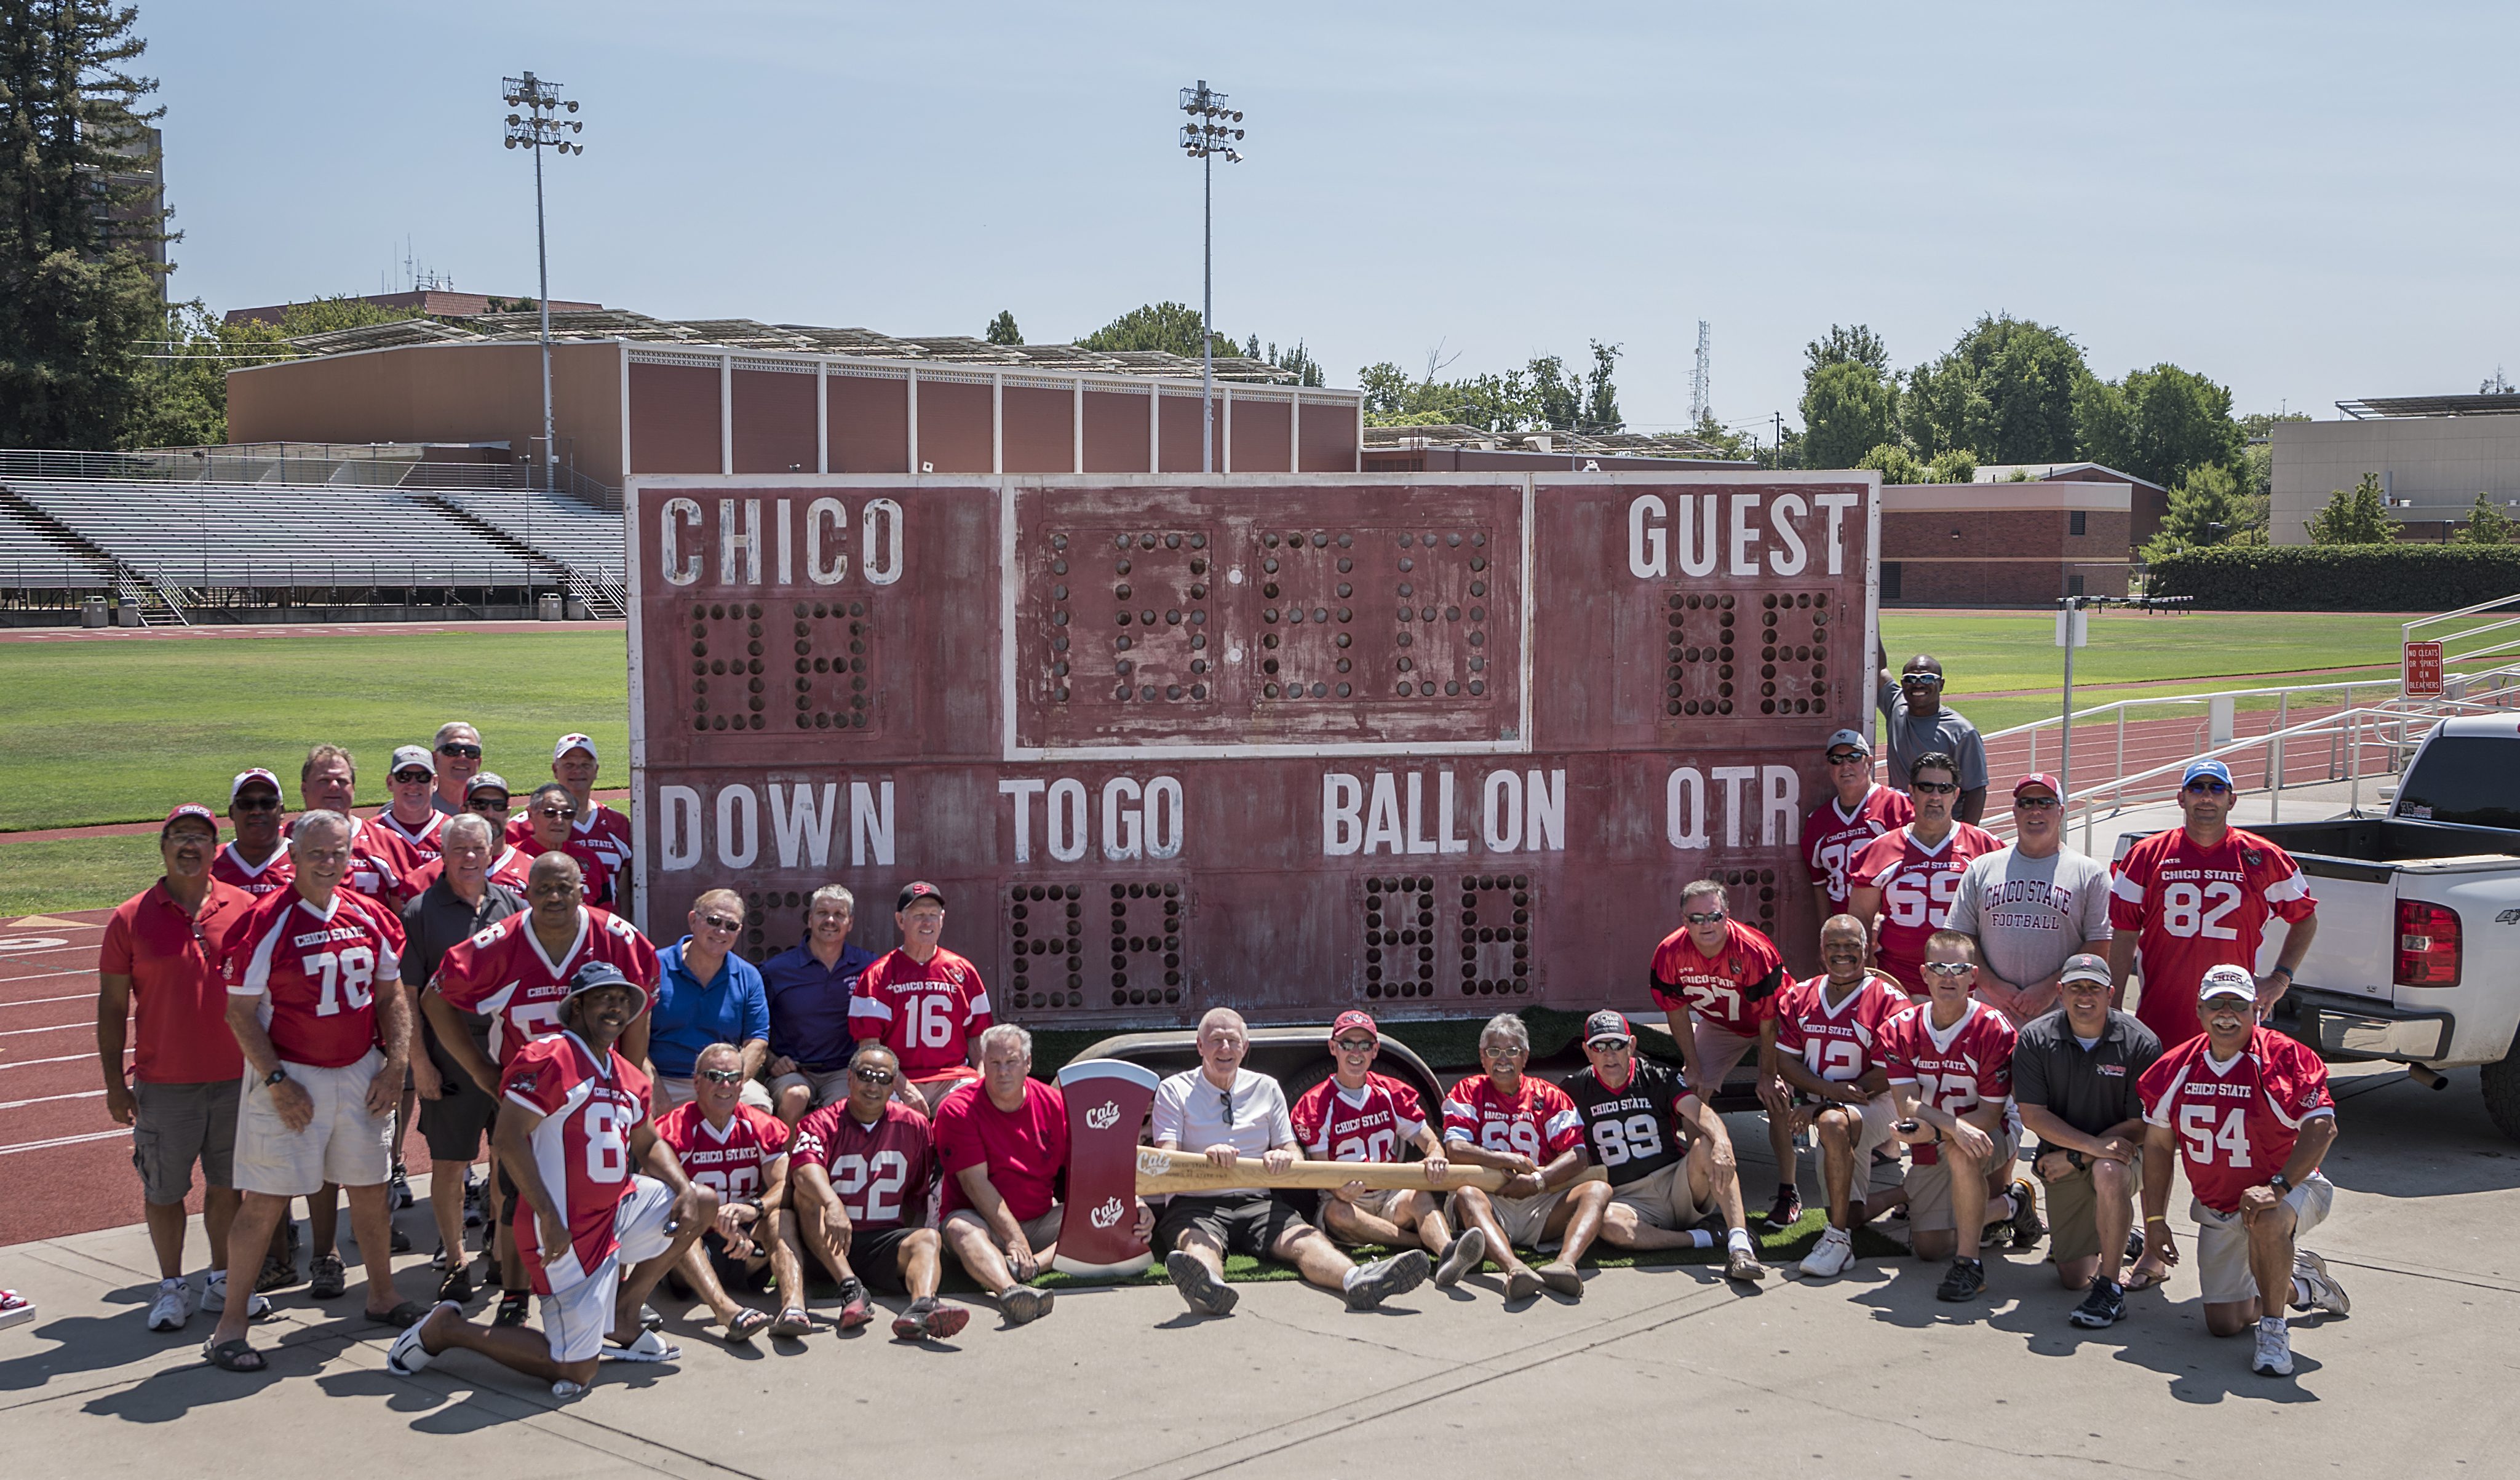 Alumni of the Chico State football team pose next to the old scoreboard.